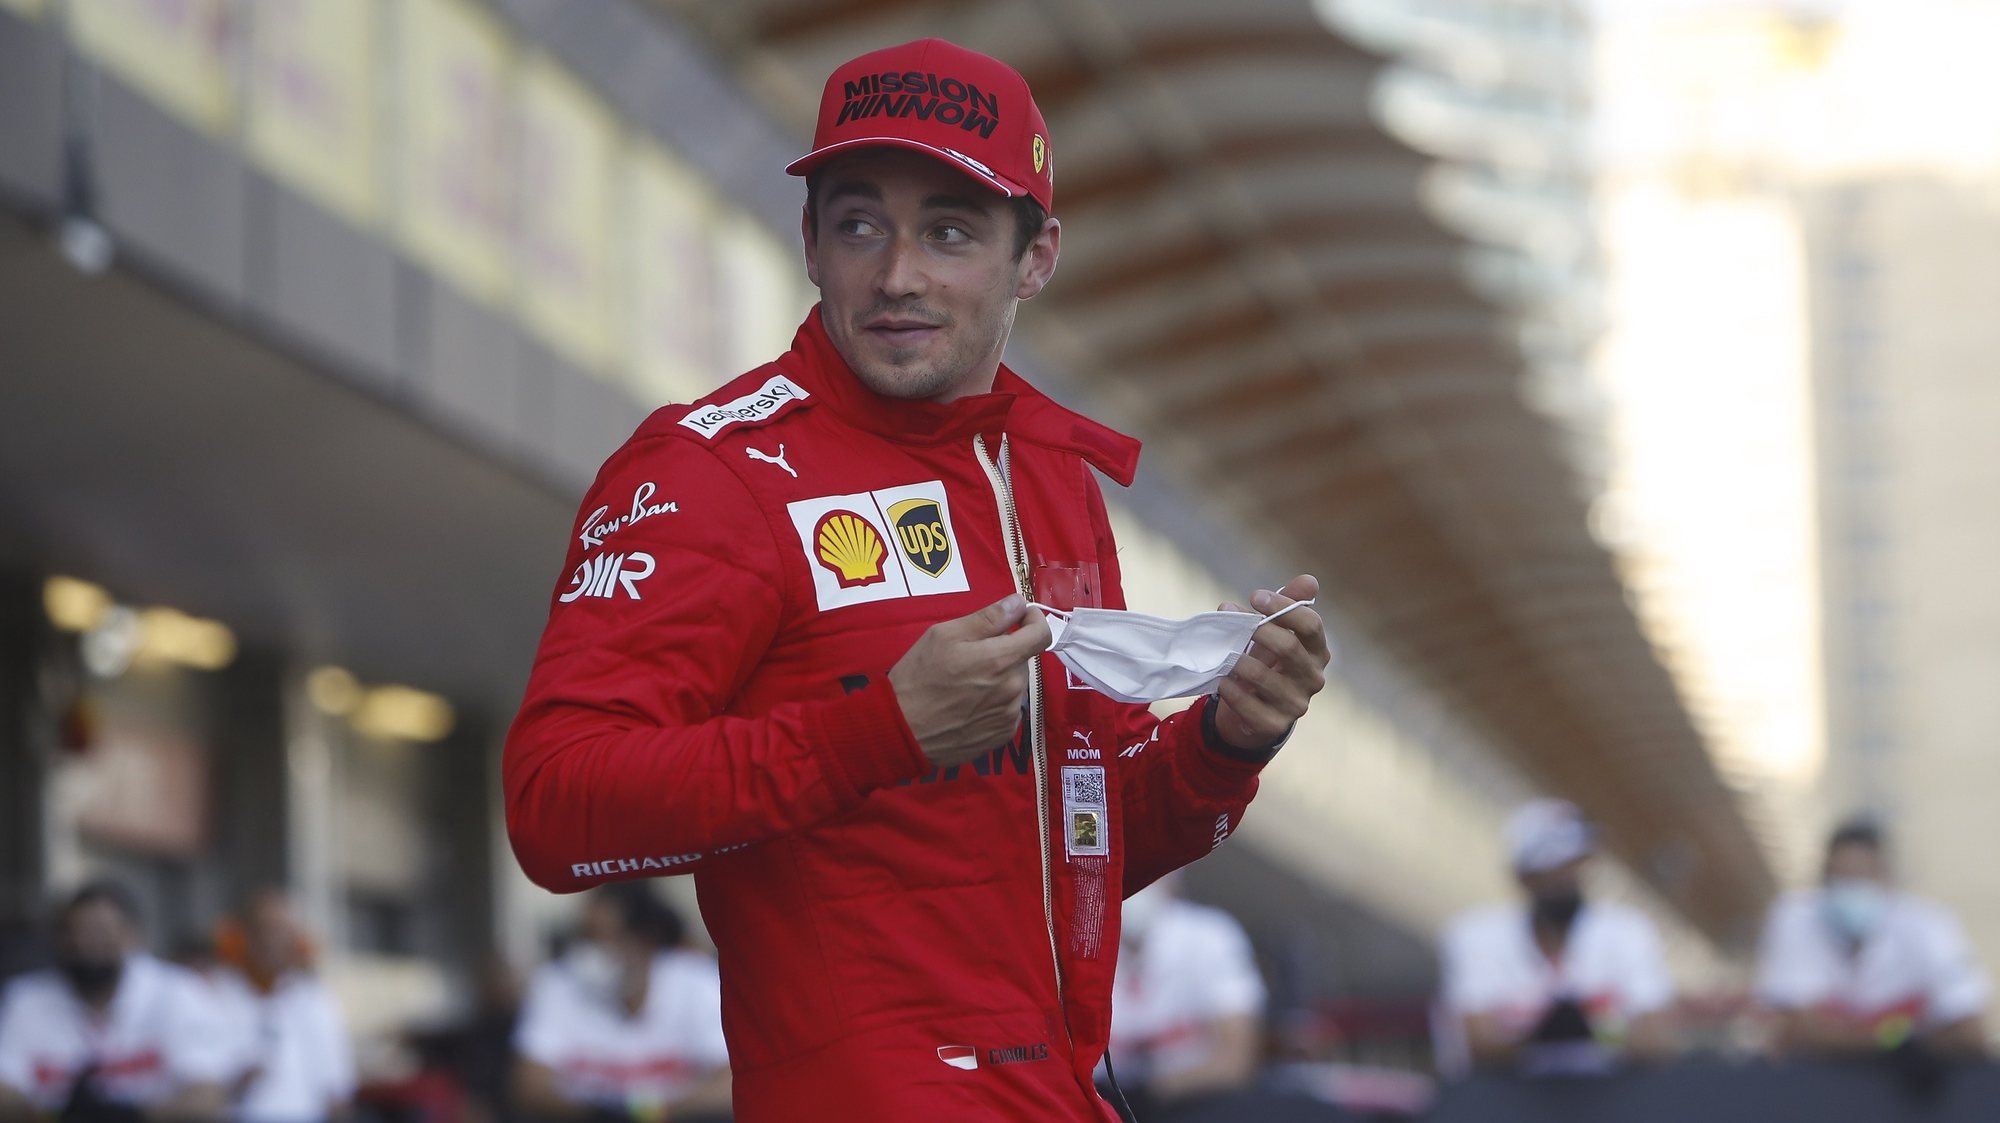 epa09249444 Monaco&#039;s Formula One driver Charles Leclerc of Scuderia Ferrari Mission Winnow reacts at parc ferme after he took pole position during the qualifying session for the Formula One Grand Prix of Azerbaijan at the Baku City Circuit in Baku, Azerbaijan, 05 June 2021. The 2021 Formula One Grand Prix of Azerbaijan will take place on 06 June.  EPA/Maxim Shemetov / POOL